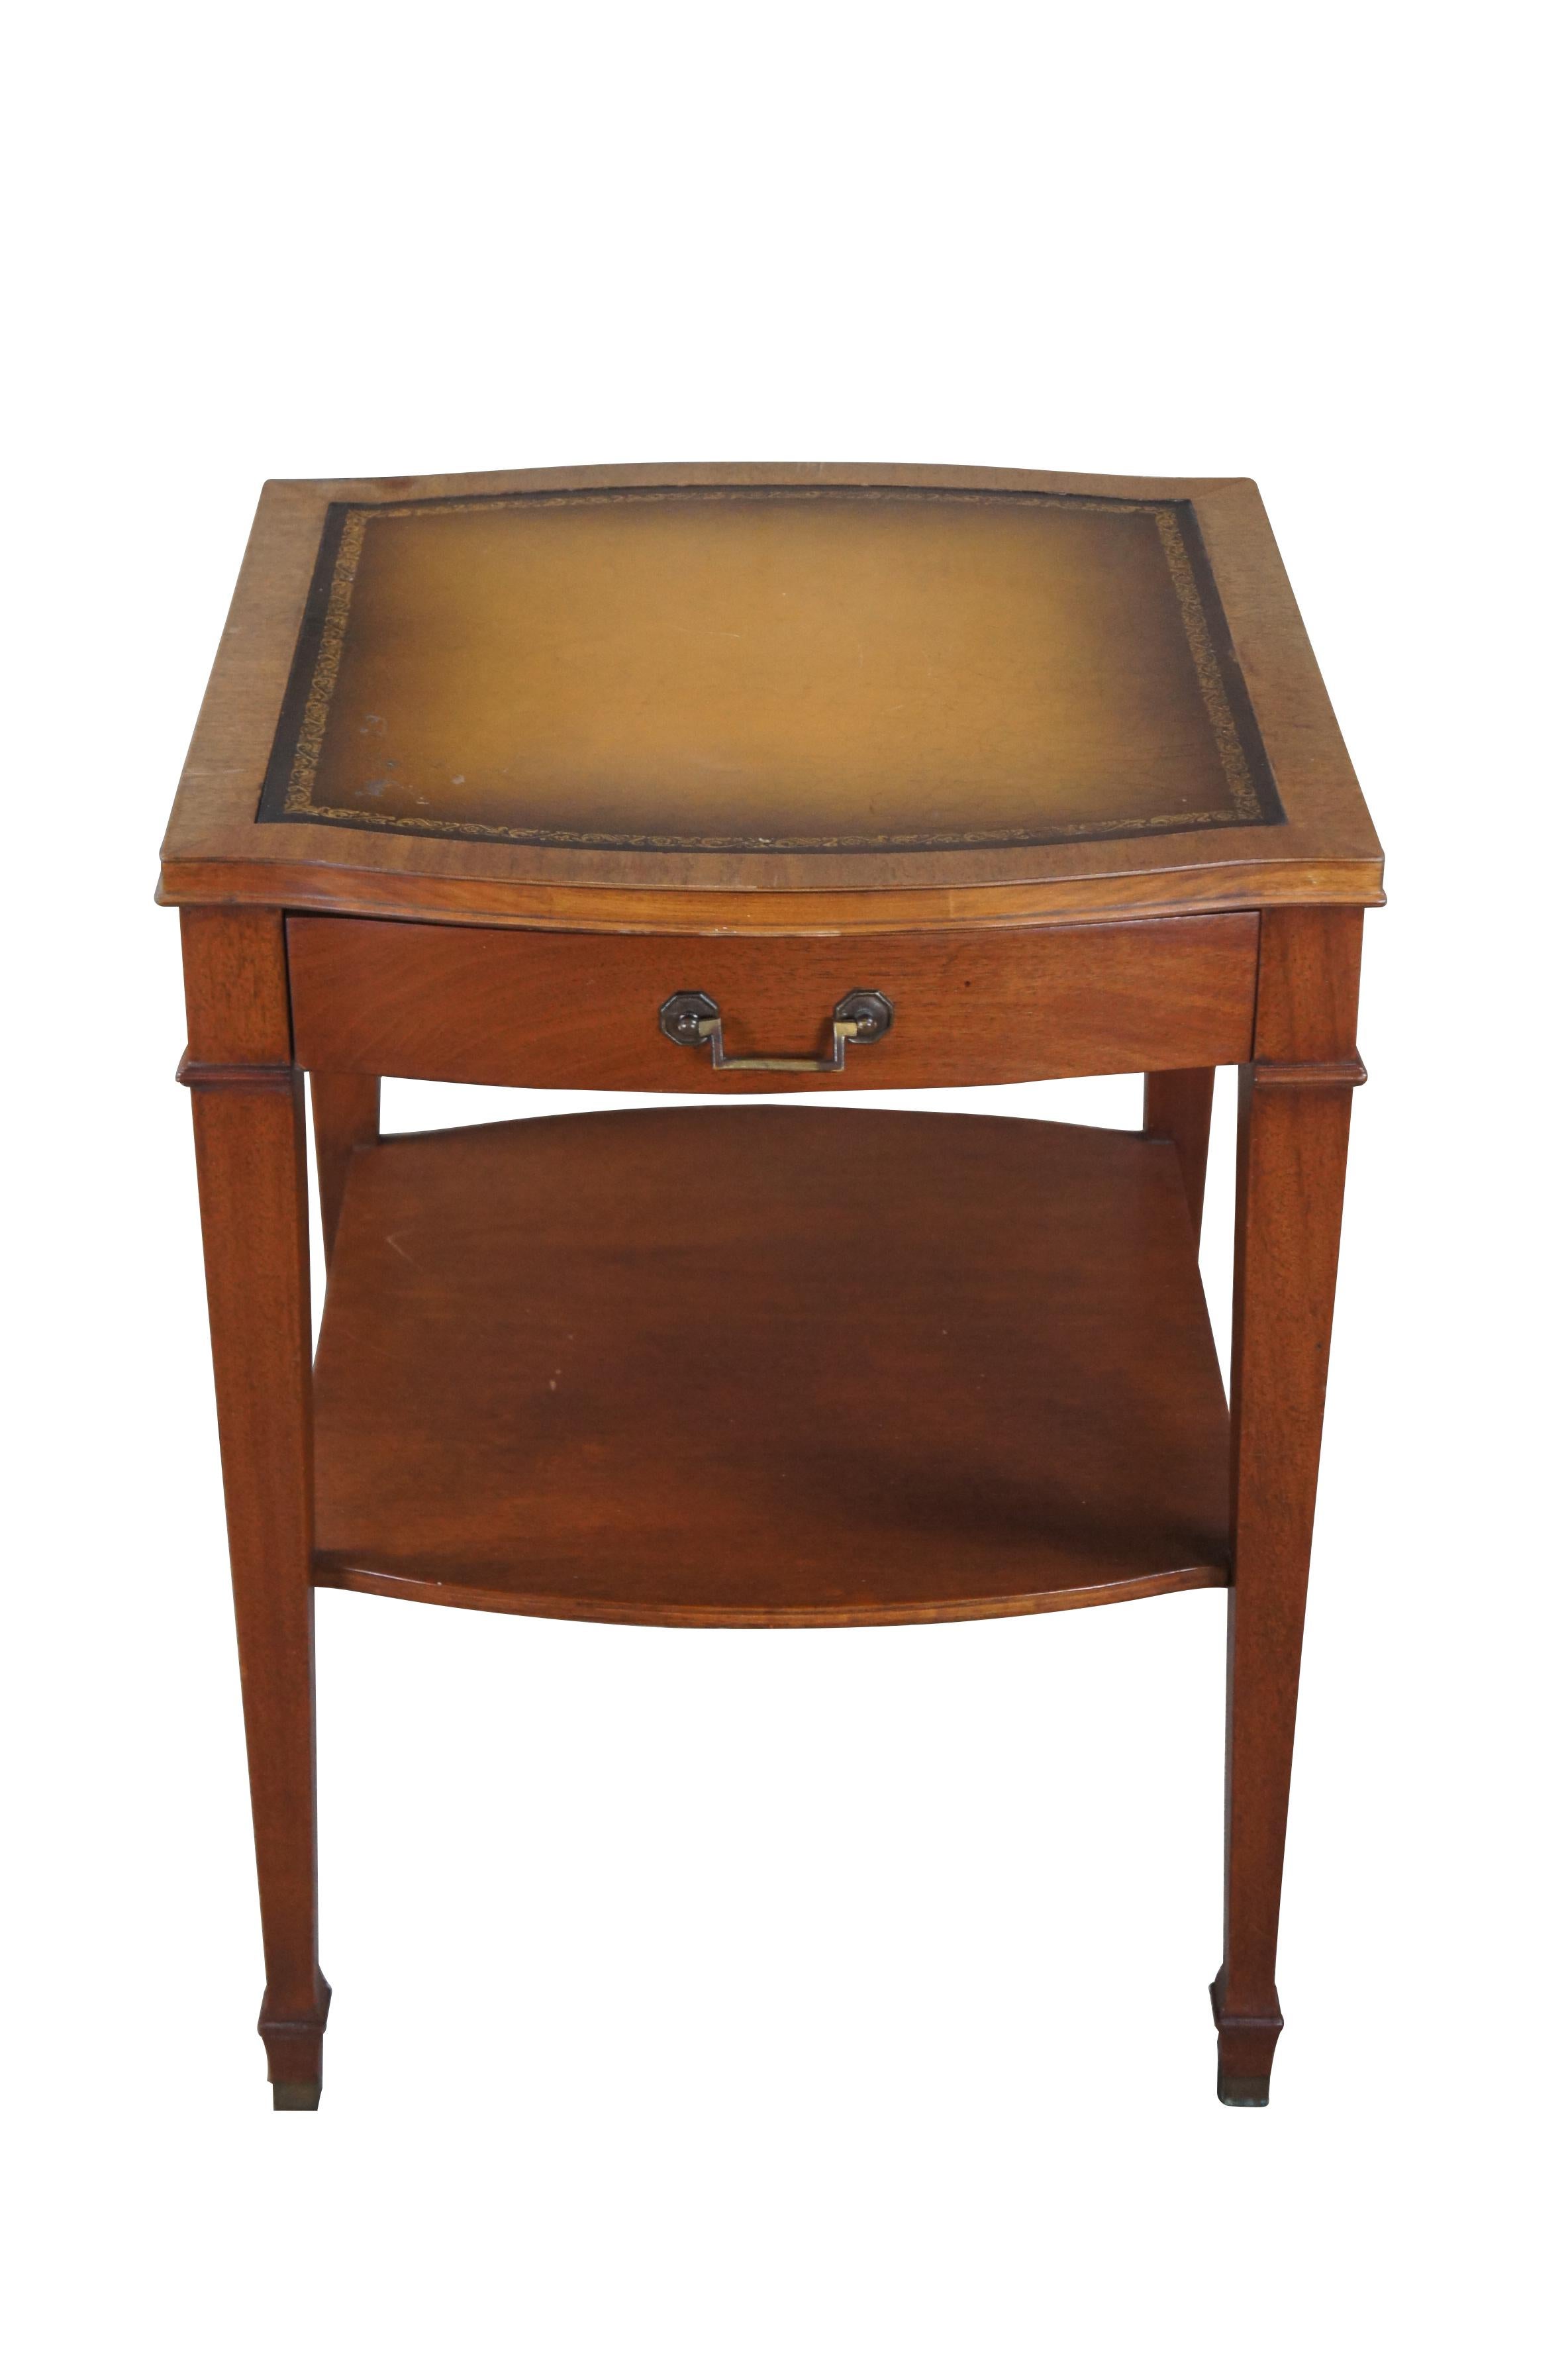 Mid 20th Century mahogany side or end table.  Features a traditional Sheraton style form with a serpentine tooled leather top. The table has one drawer with bale hardware and a lower drawer.  Supported by square tapered legs with spade feet.  The